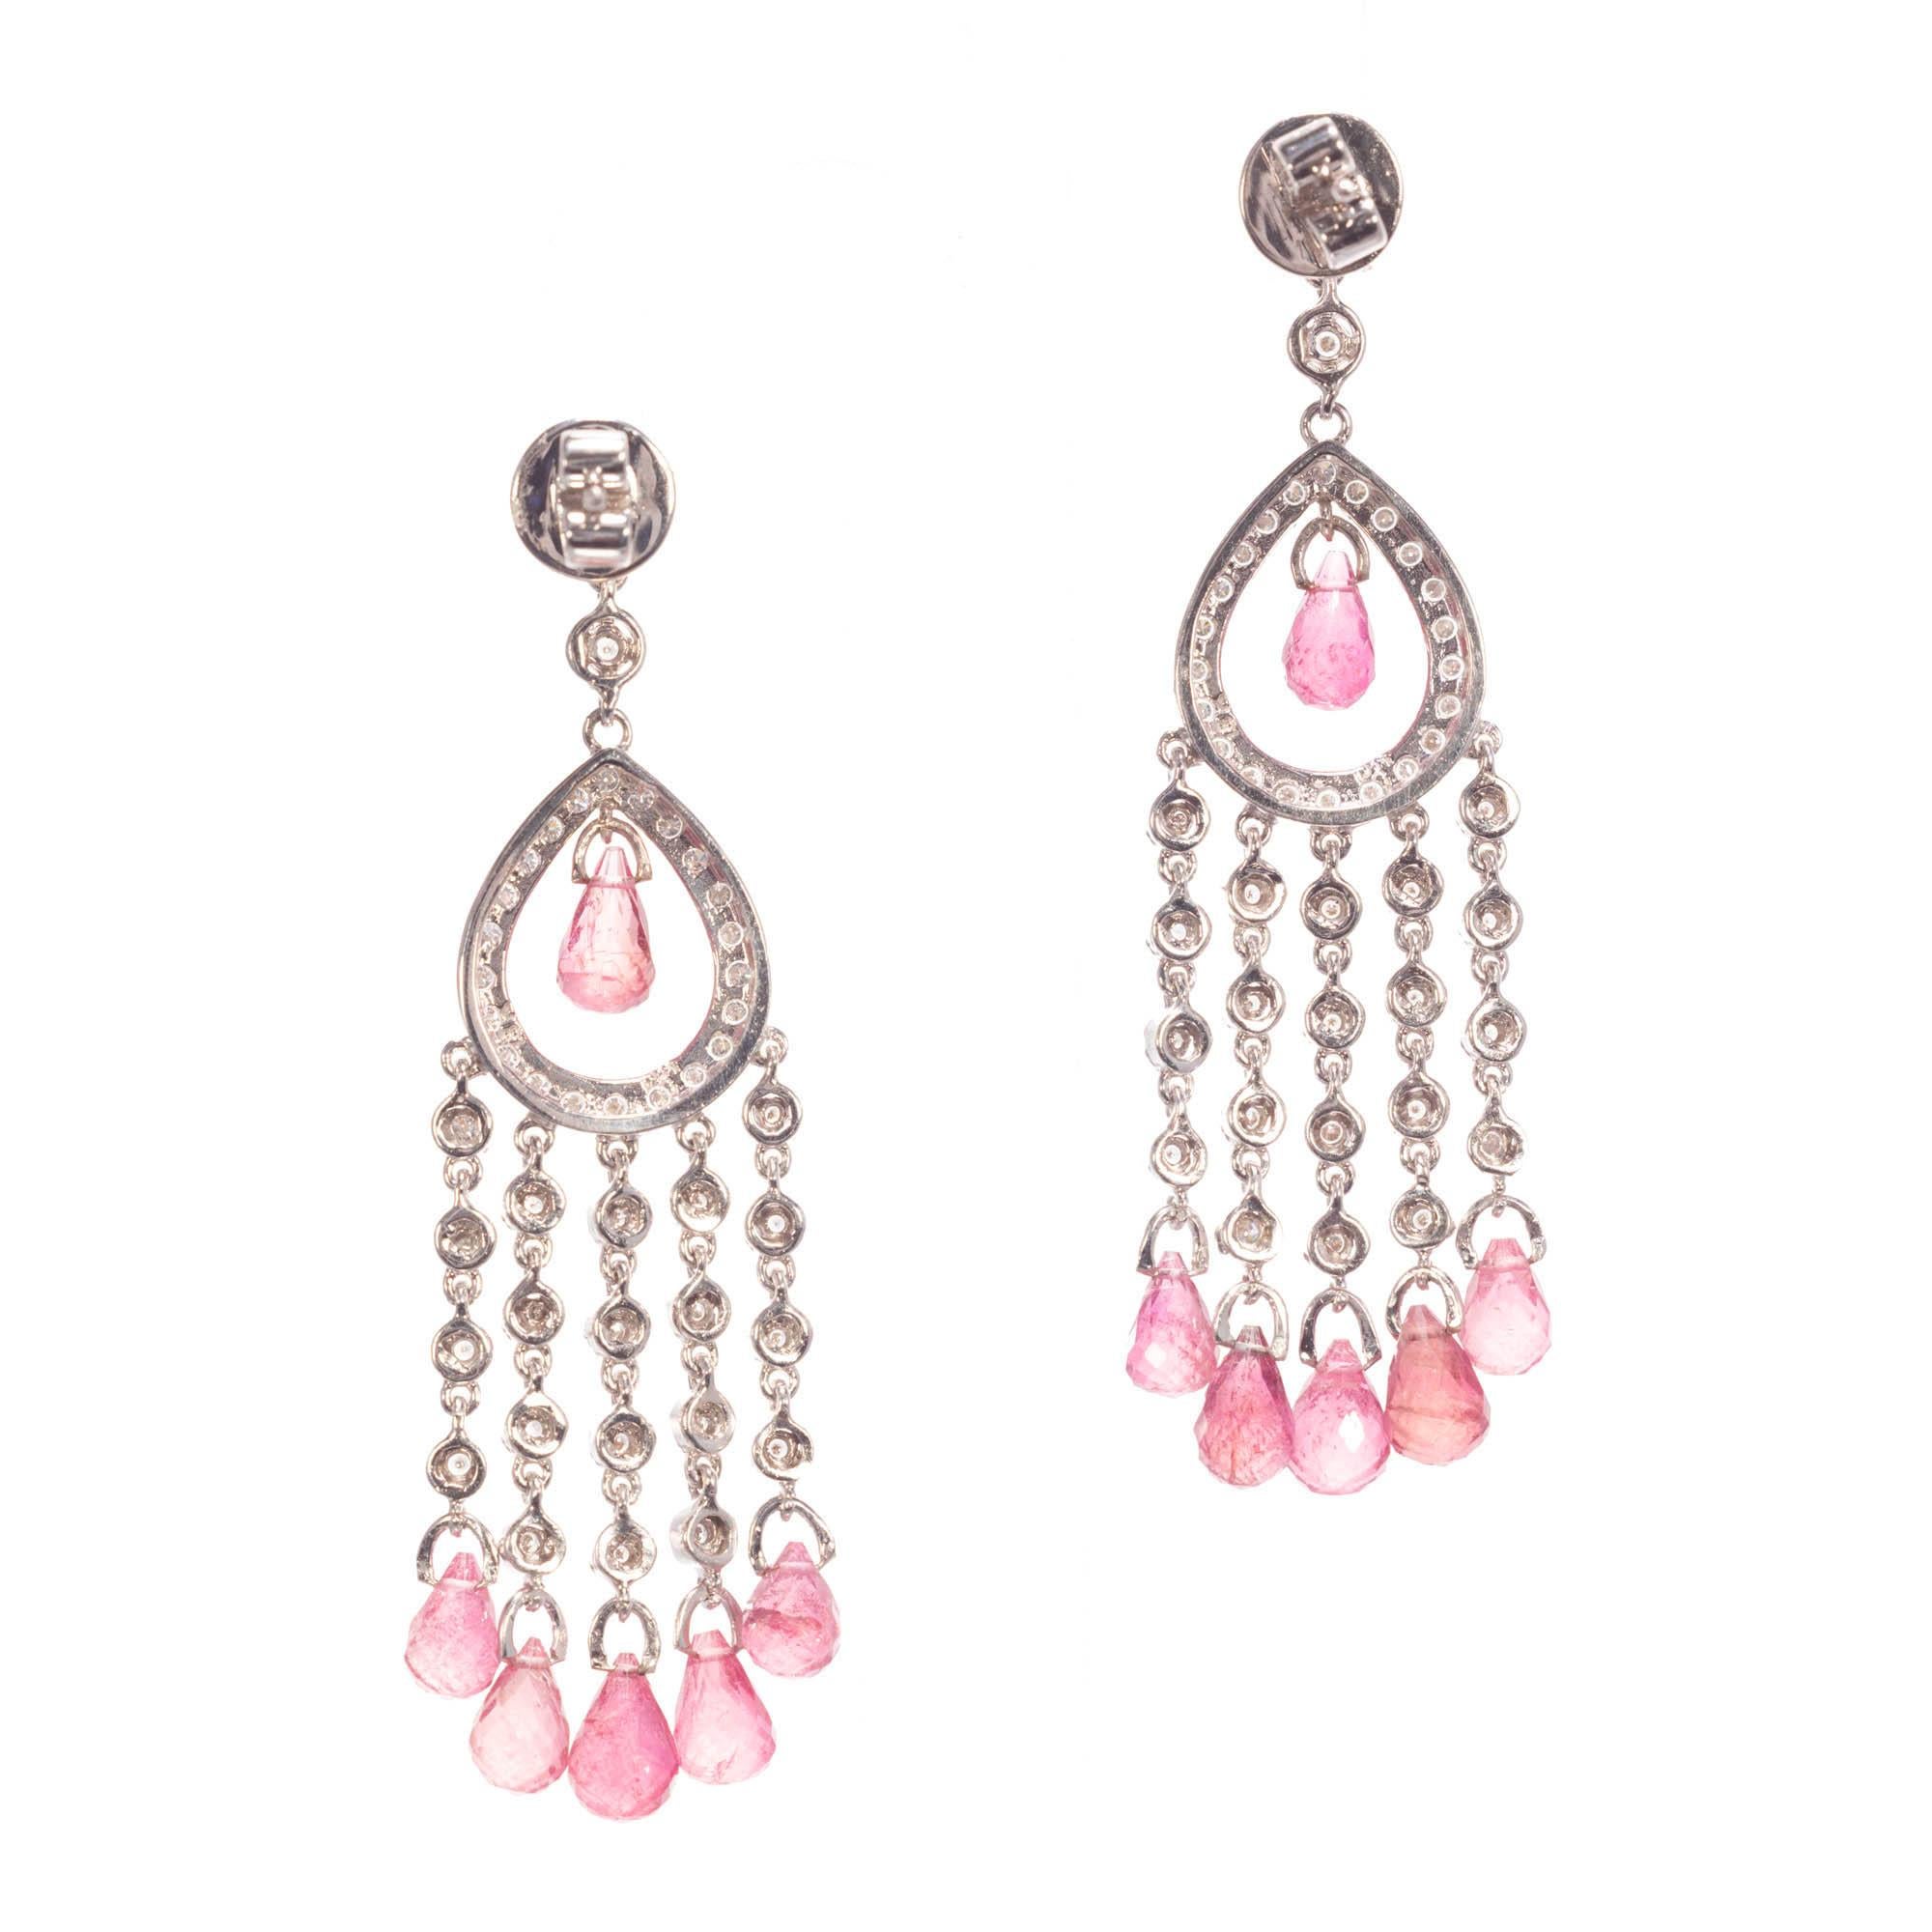 Diamond and tourmaline, Chandelier style dangle earrings in 18k white gold with bright full cut Diamonds and briolette cut pink Tourmaline.

88 round full cut Diamonds, approx. total weight 1.65cts, H, SI
12 pink Tourmaline Briolette’s, approx.